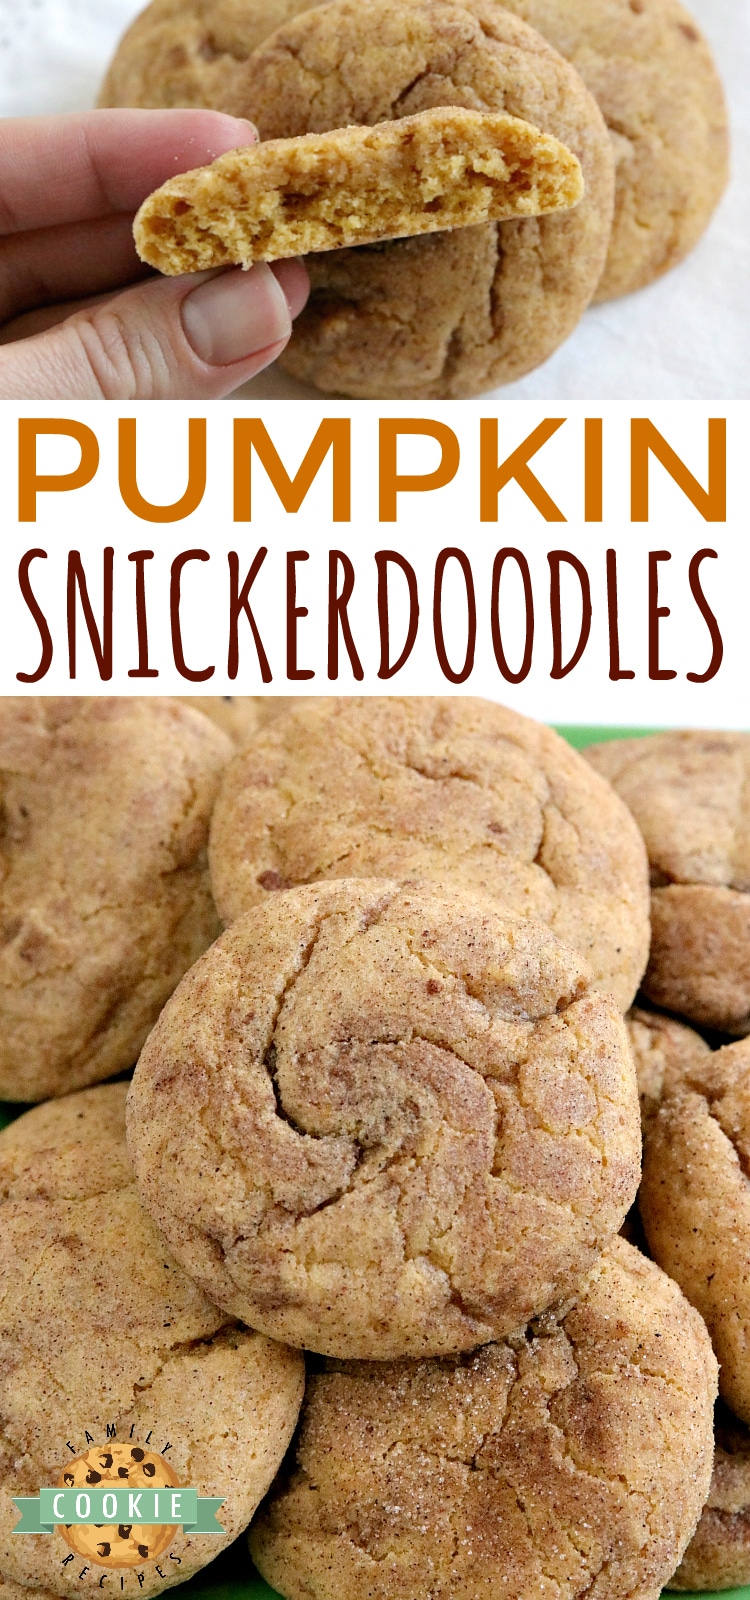 Pumpkin Snickerdoodles are soft, chewy and packed with pumpkin flavor! These delicious pumpkin cookies are rolled in cinnamon and sugar - one of my favorite fall cookie recipes!